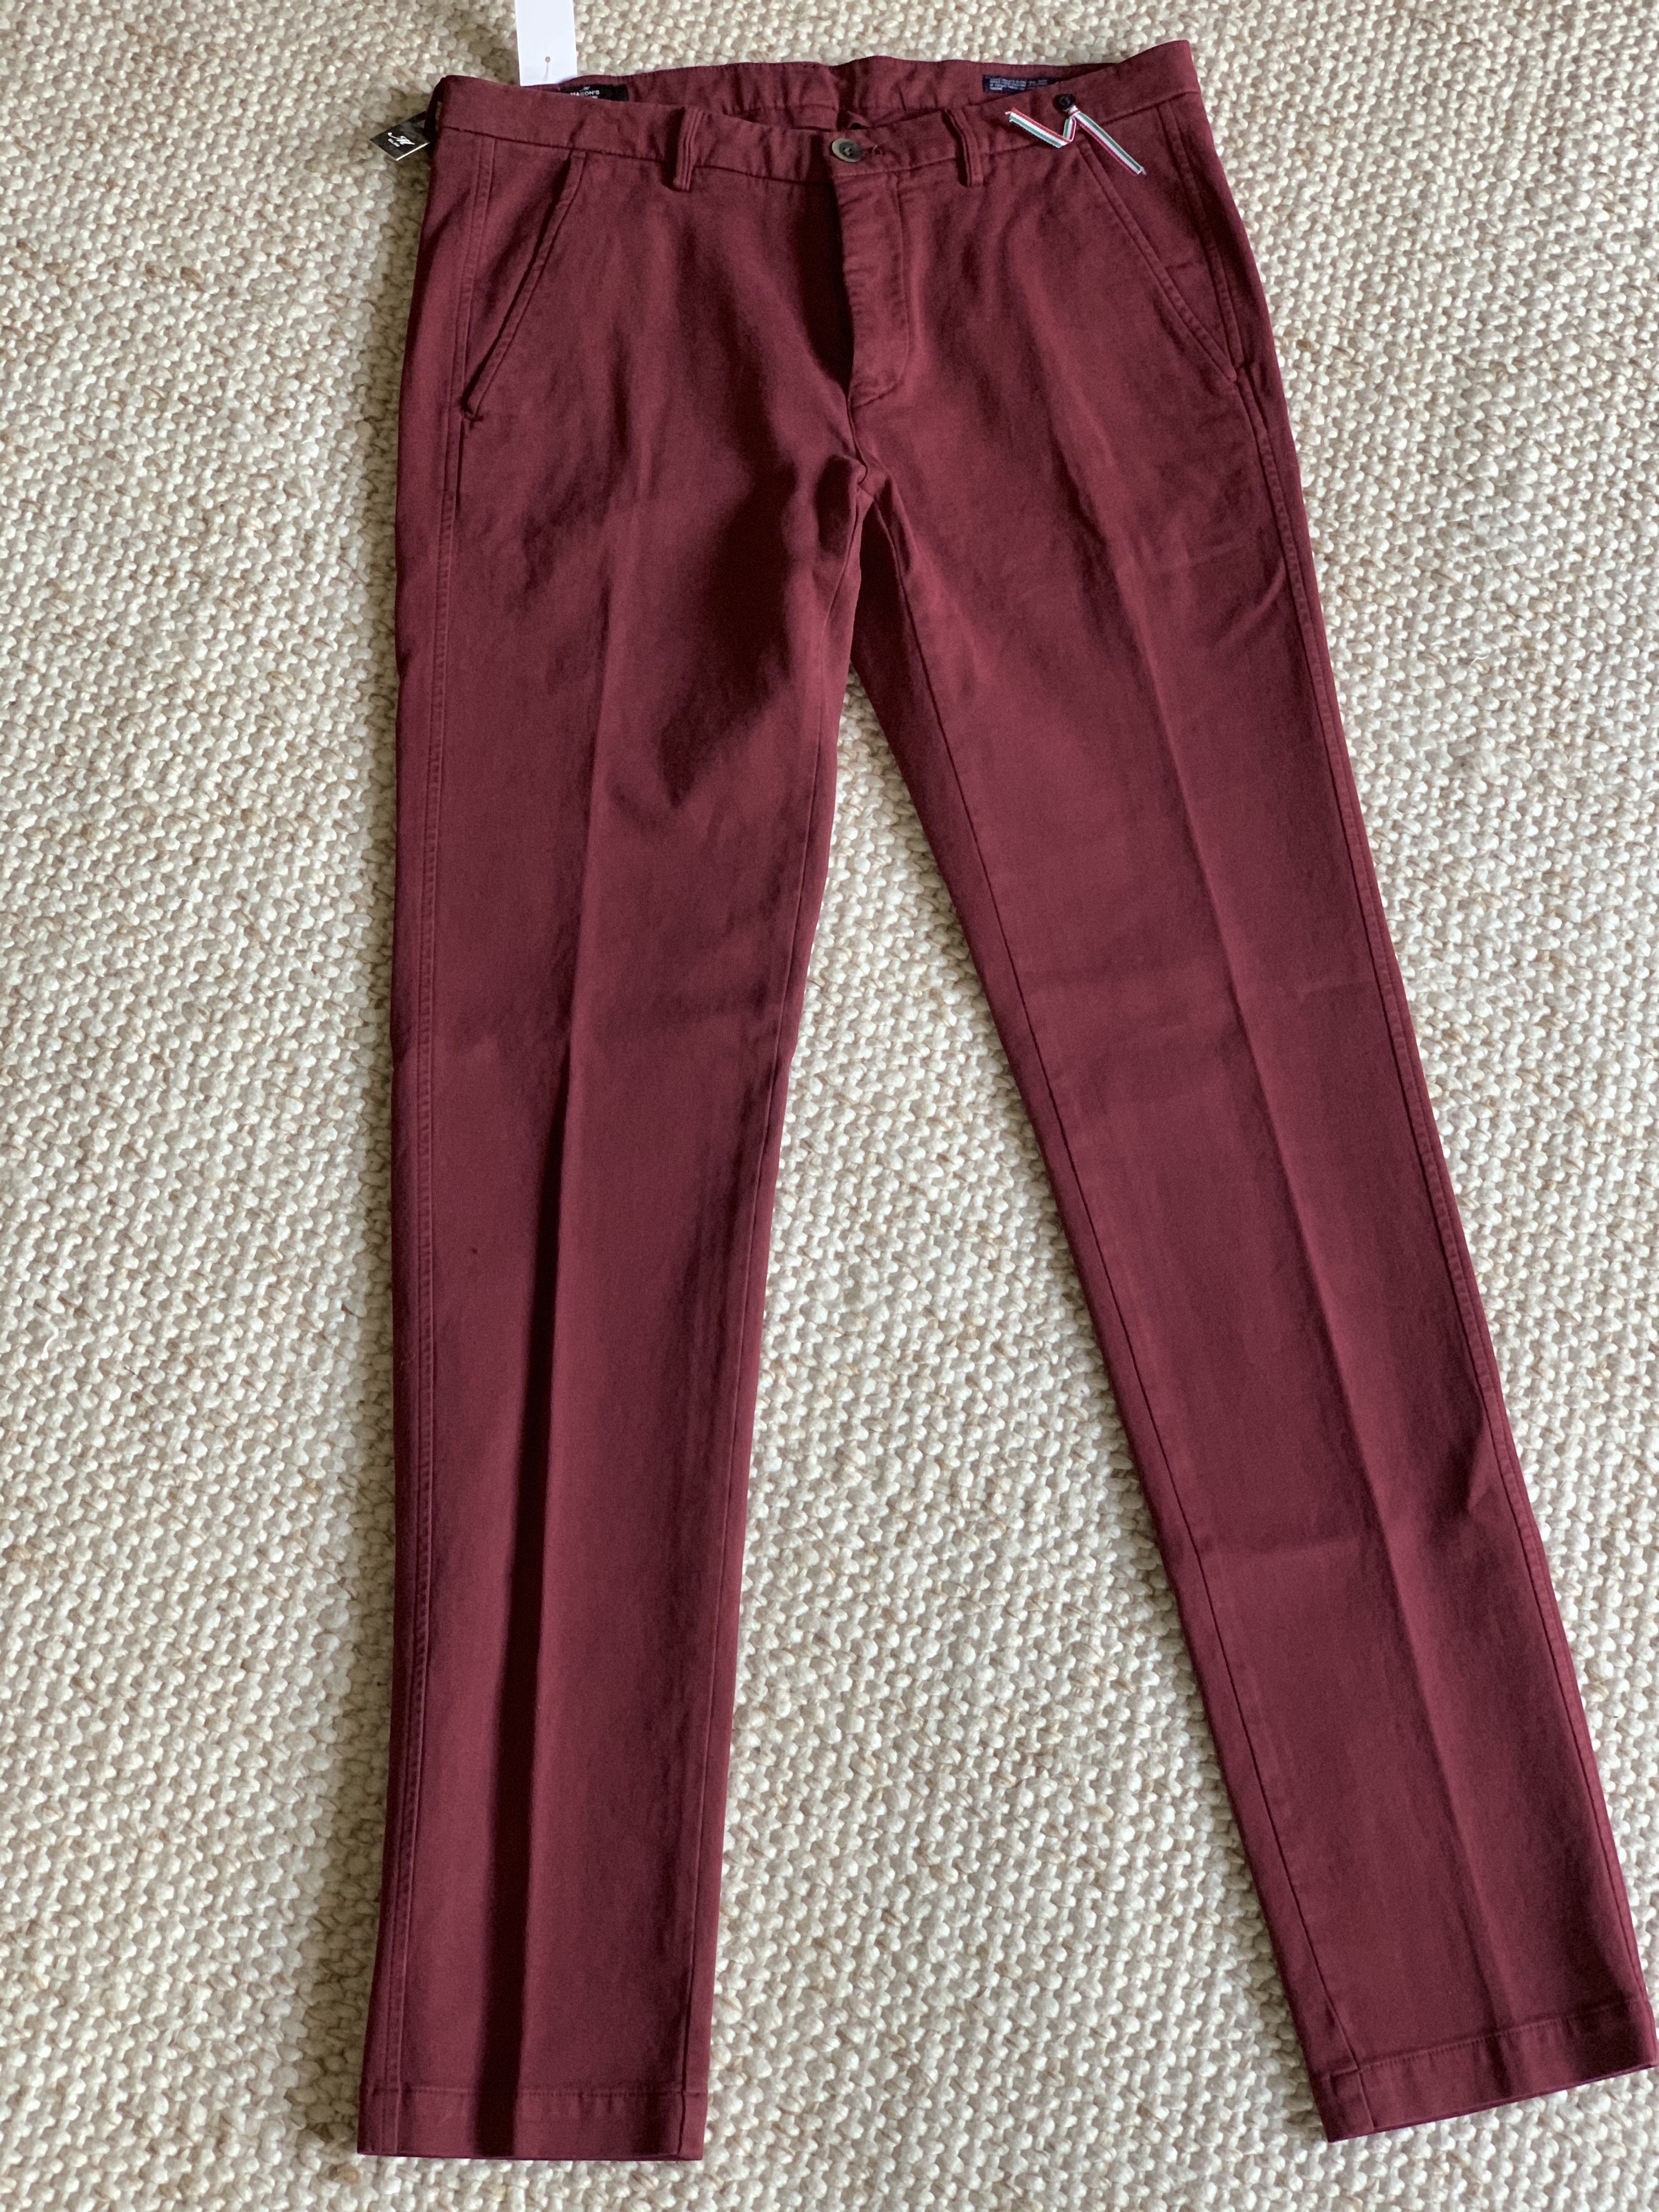 Masons - NWT $315.00 - Tricotine Jersey Slim-Fit Trousers - 1